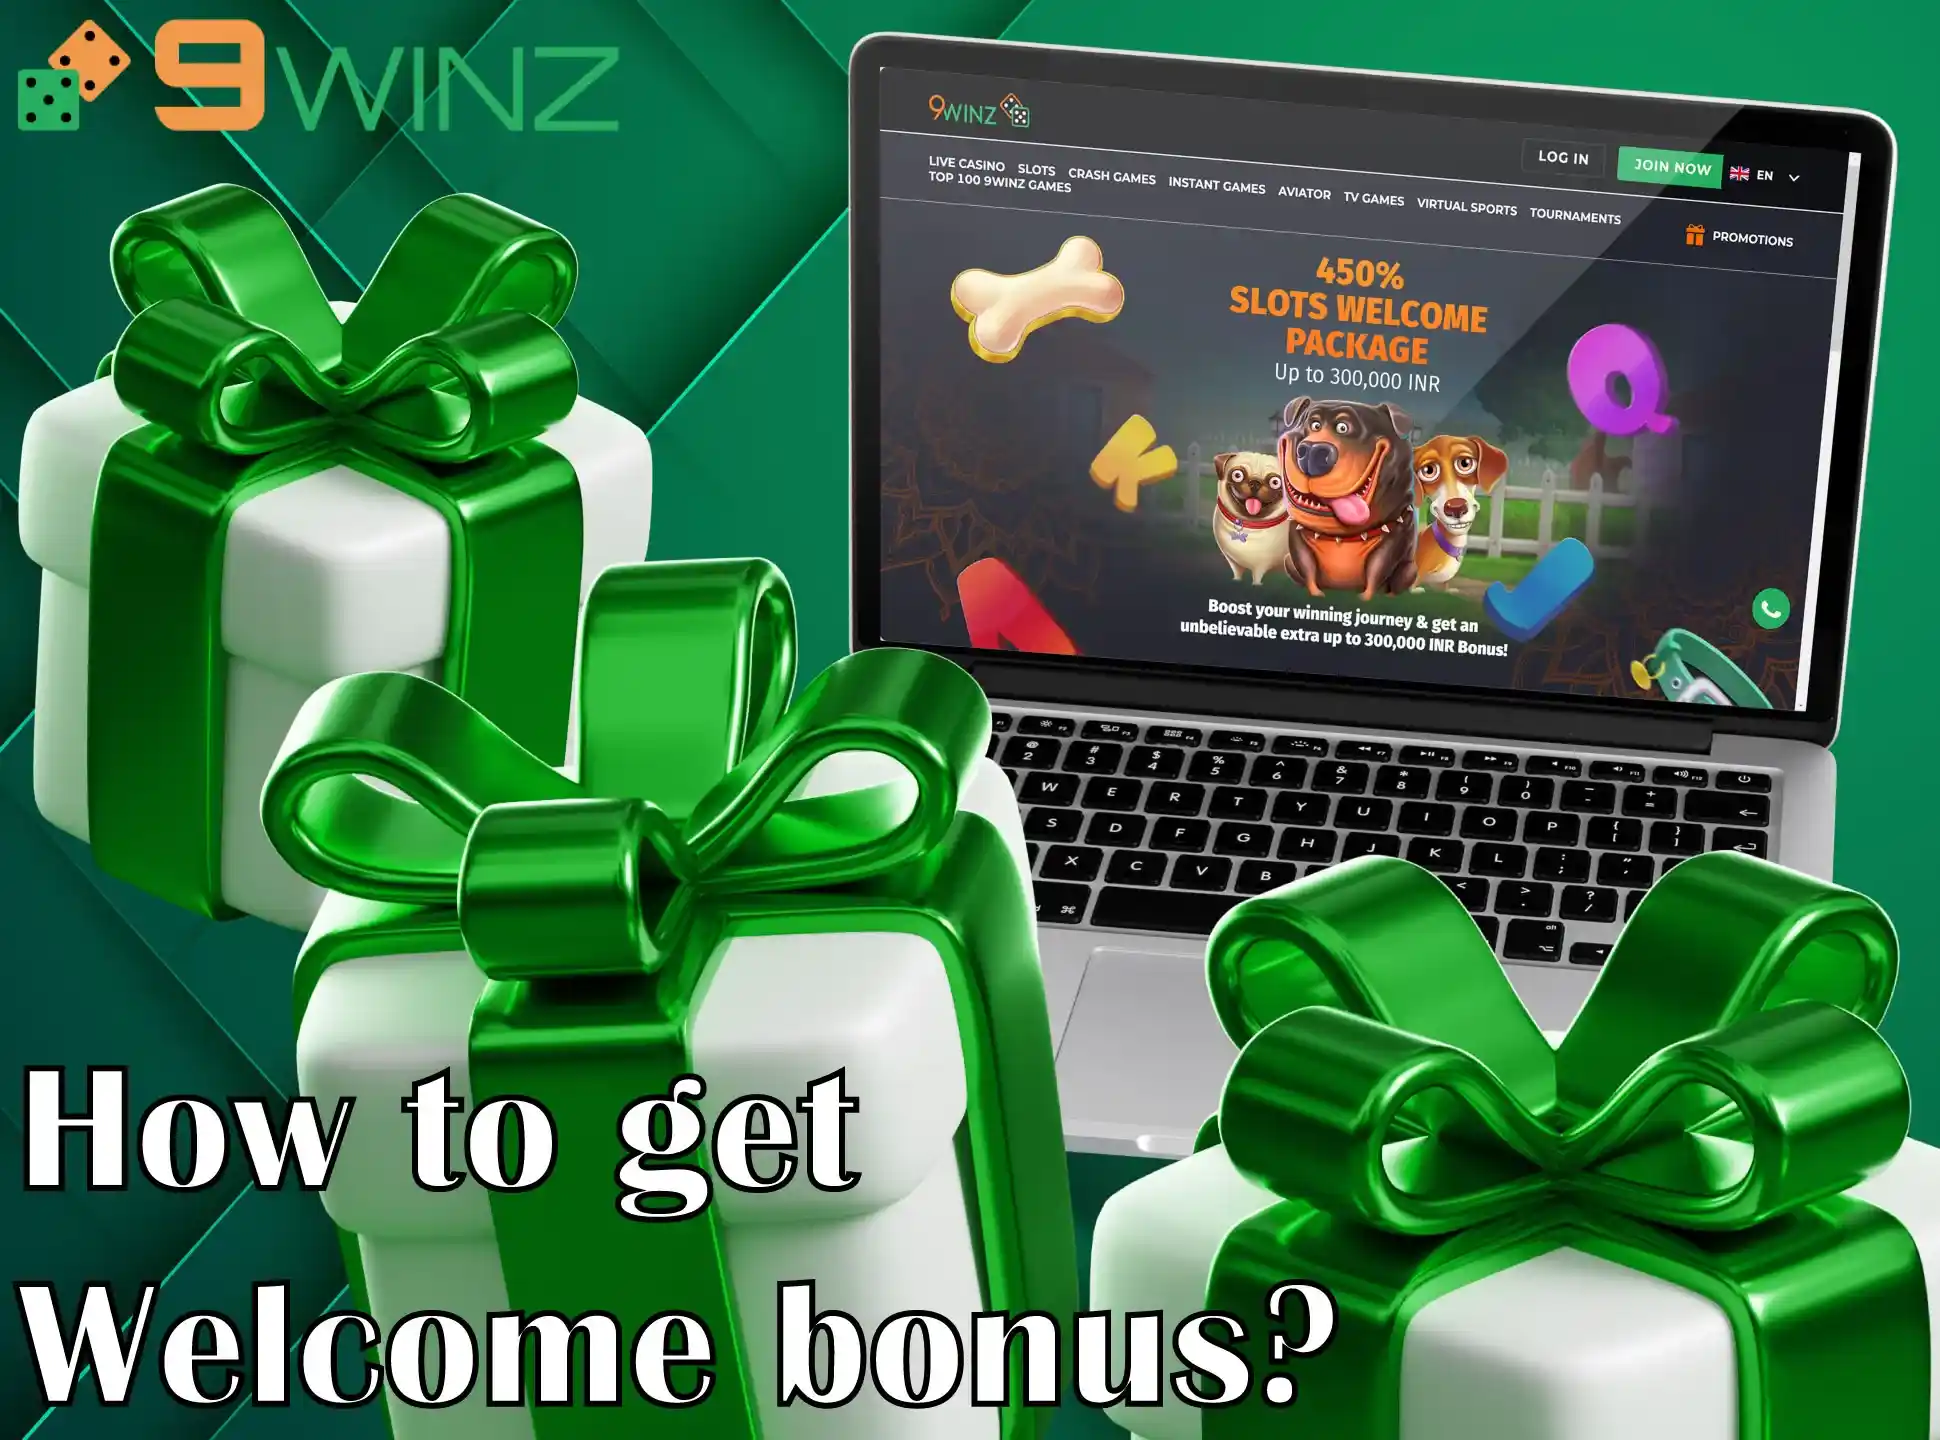 Do the following to get a 9winz Welcome bonus.